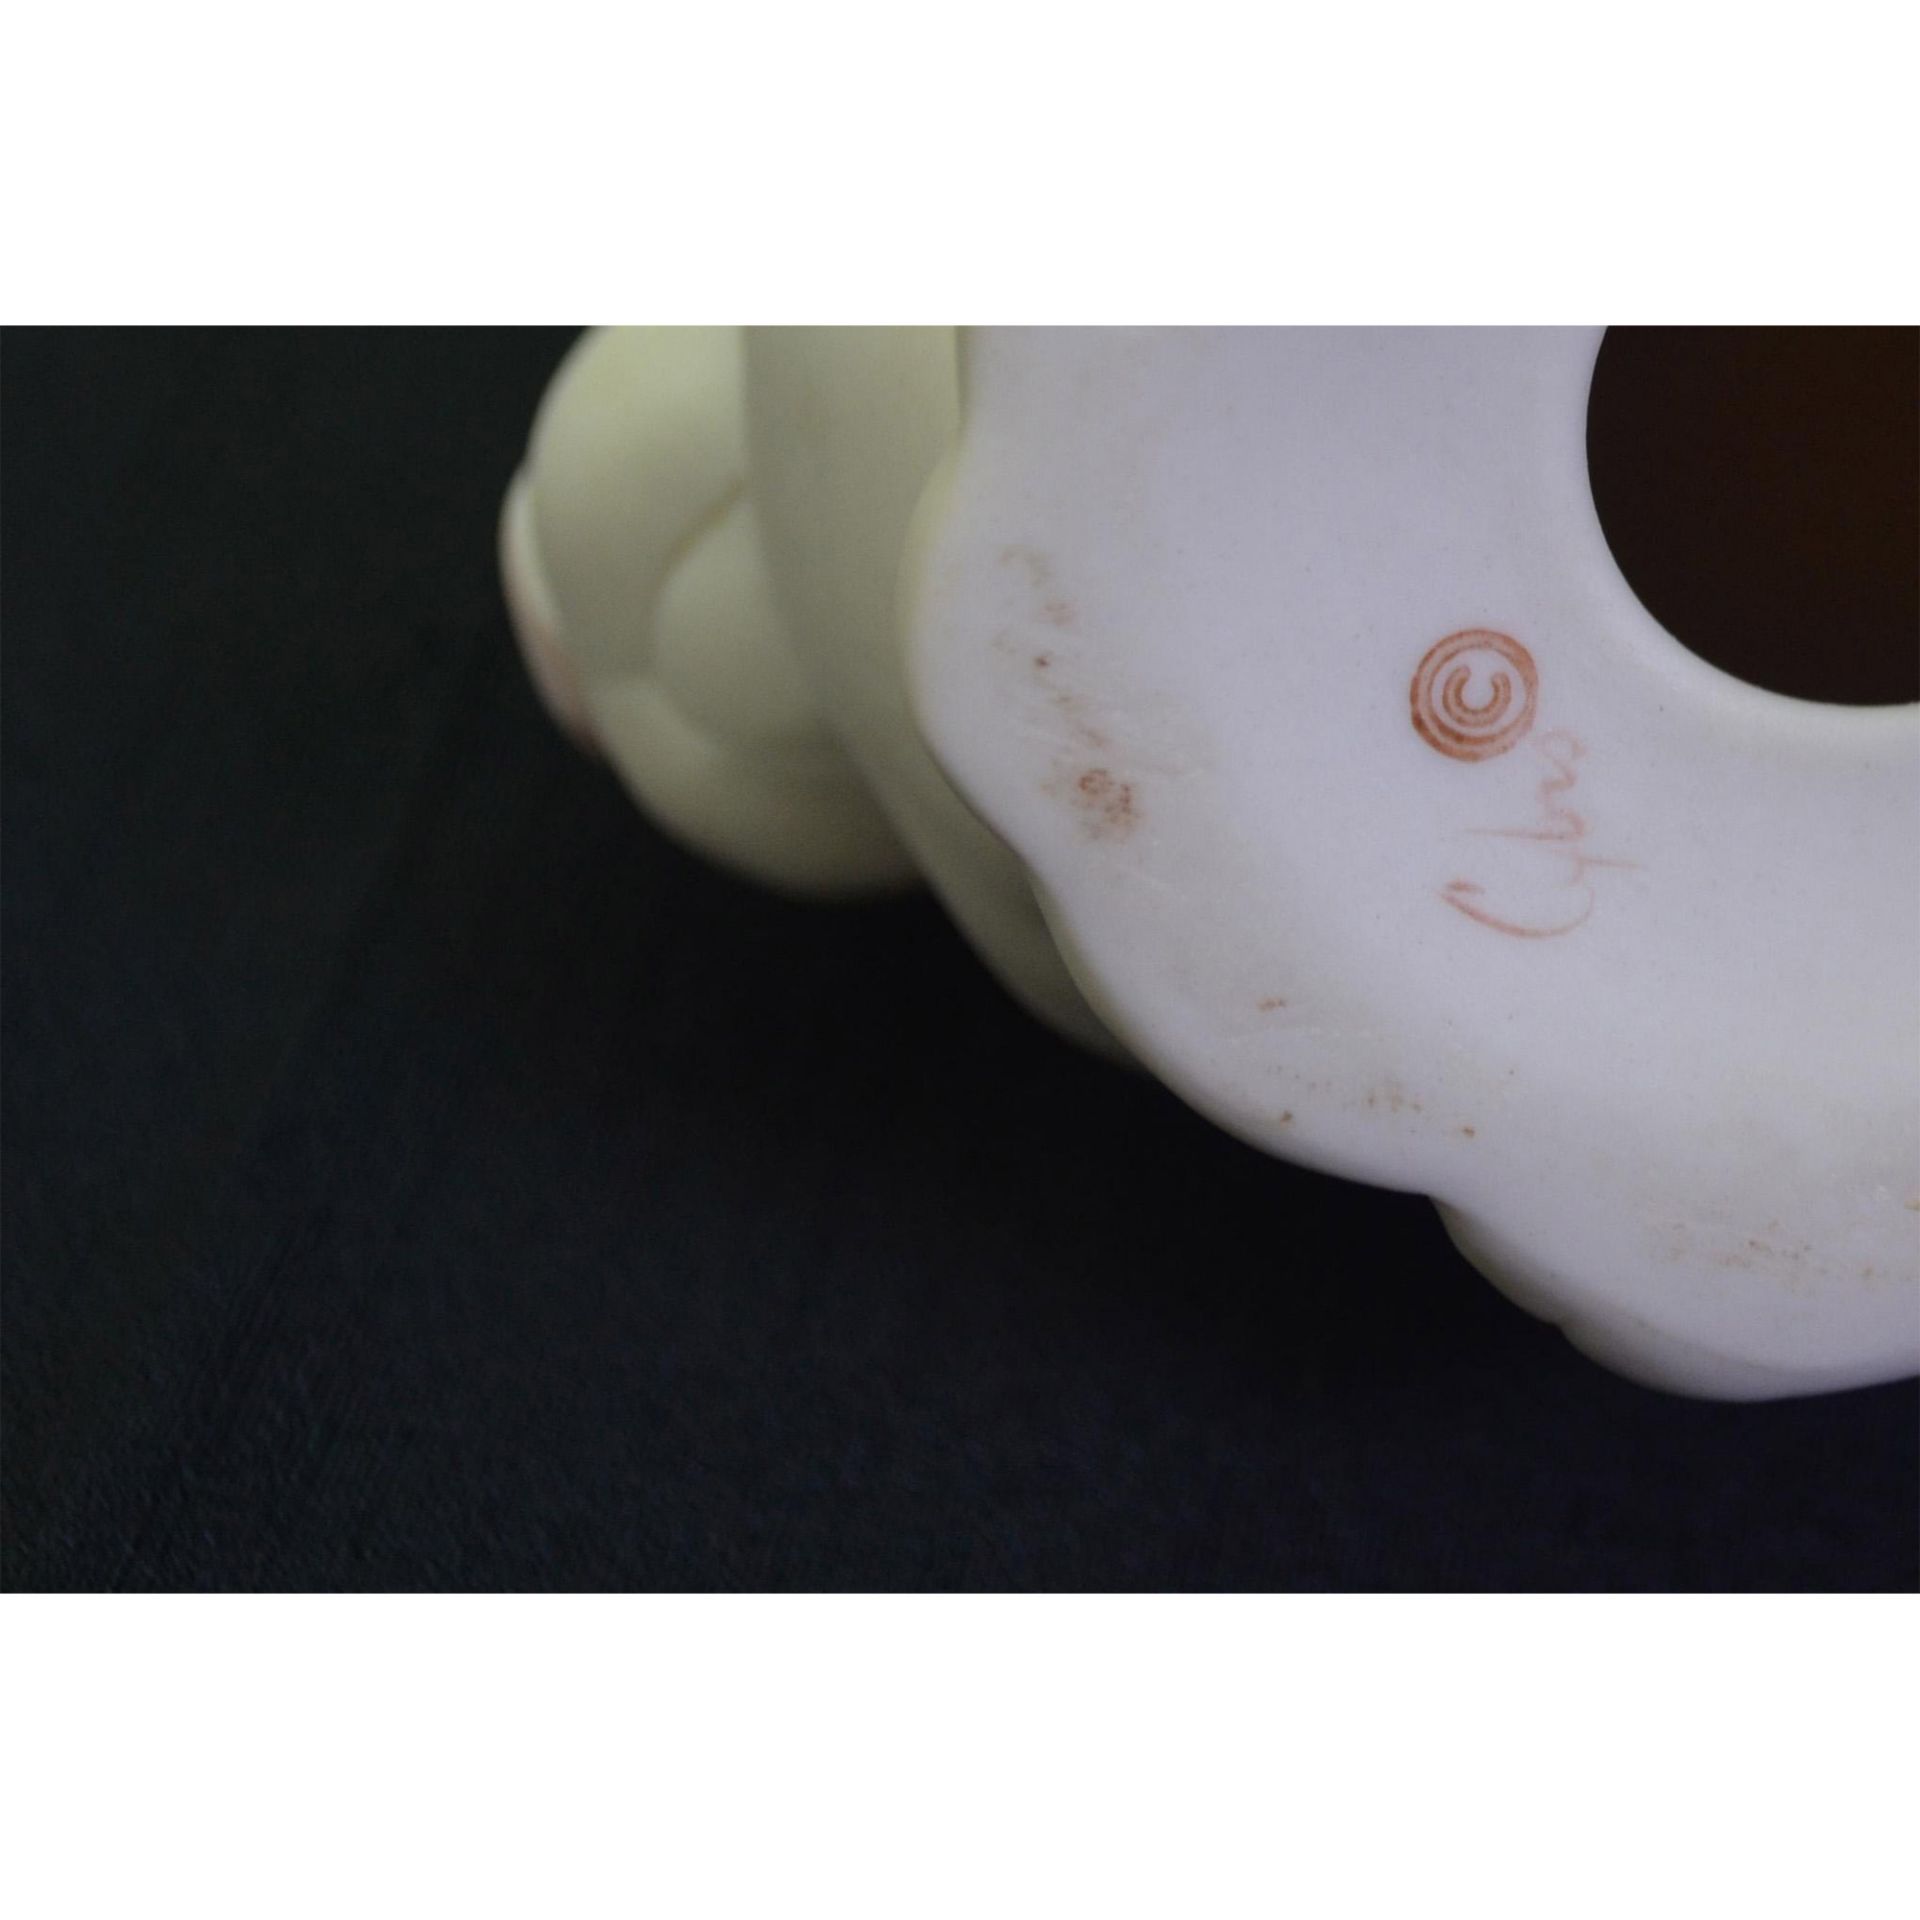 Cybis Porcelain Bunny Mr. Snowball - Image 4 of 4